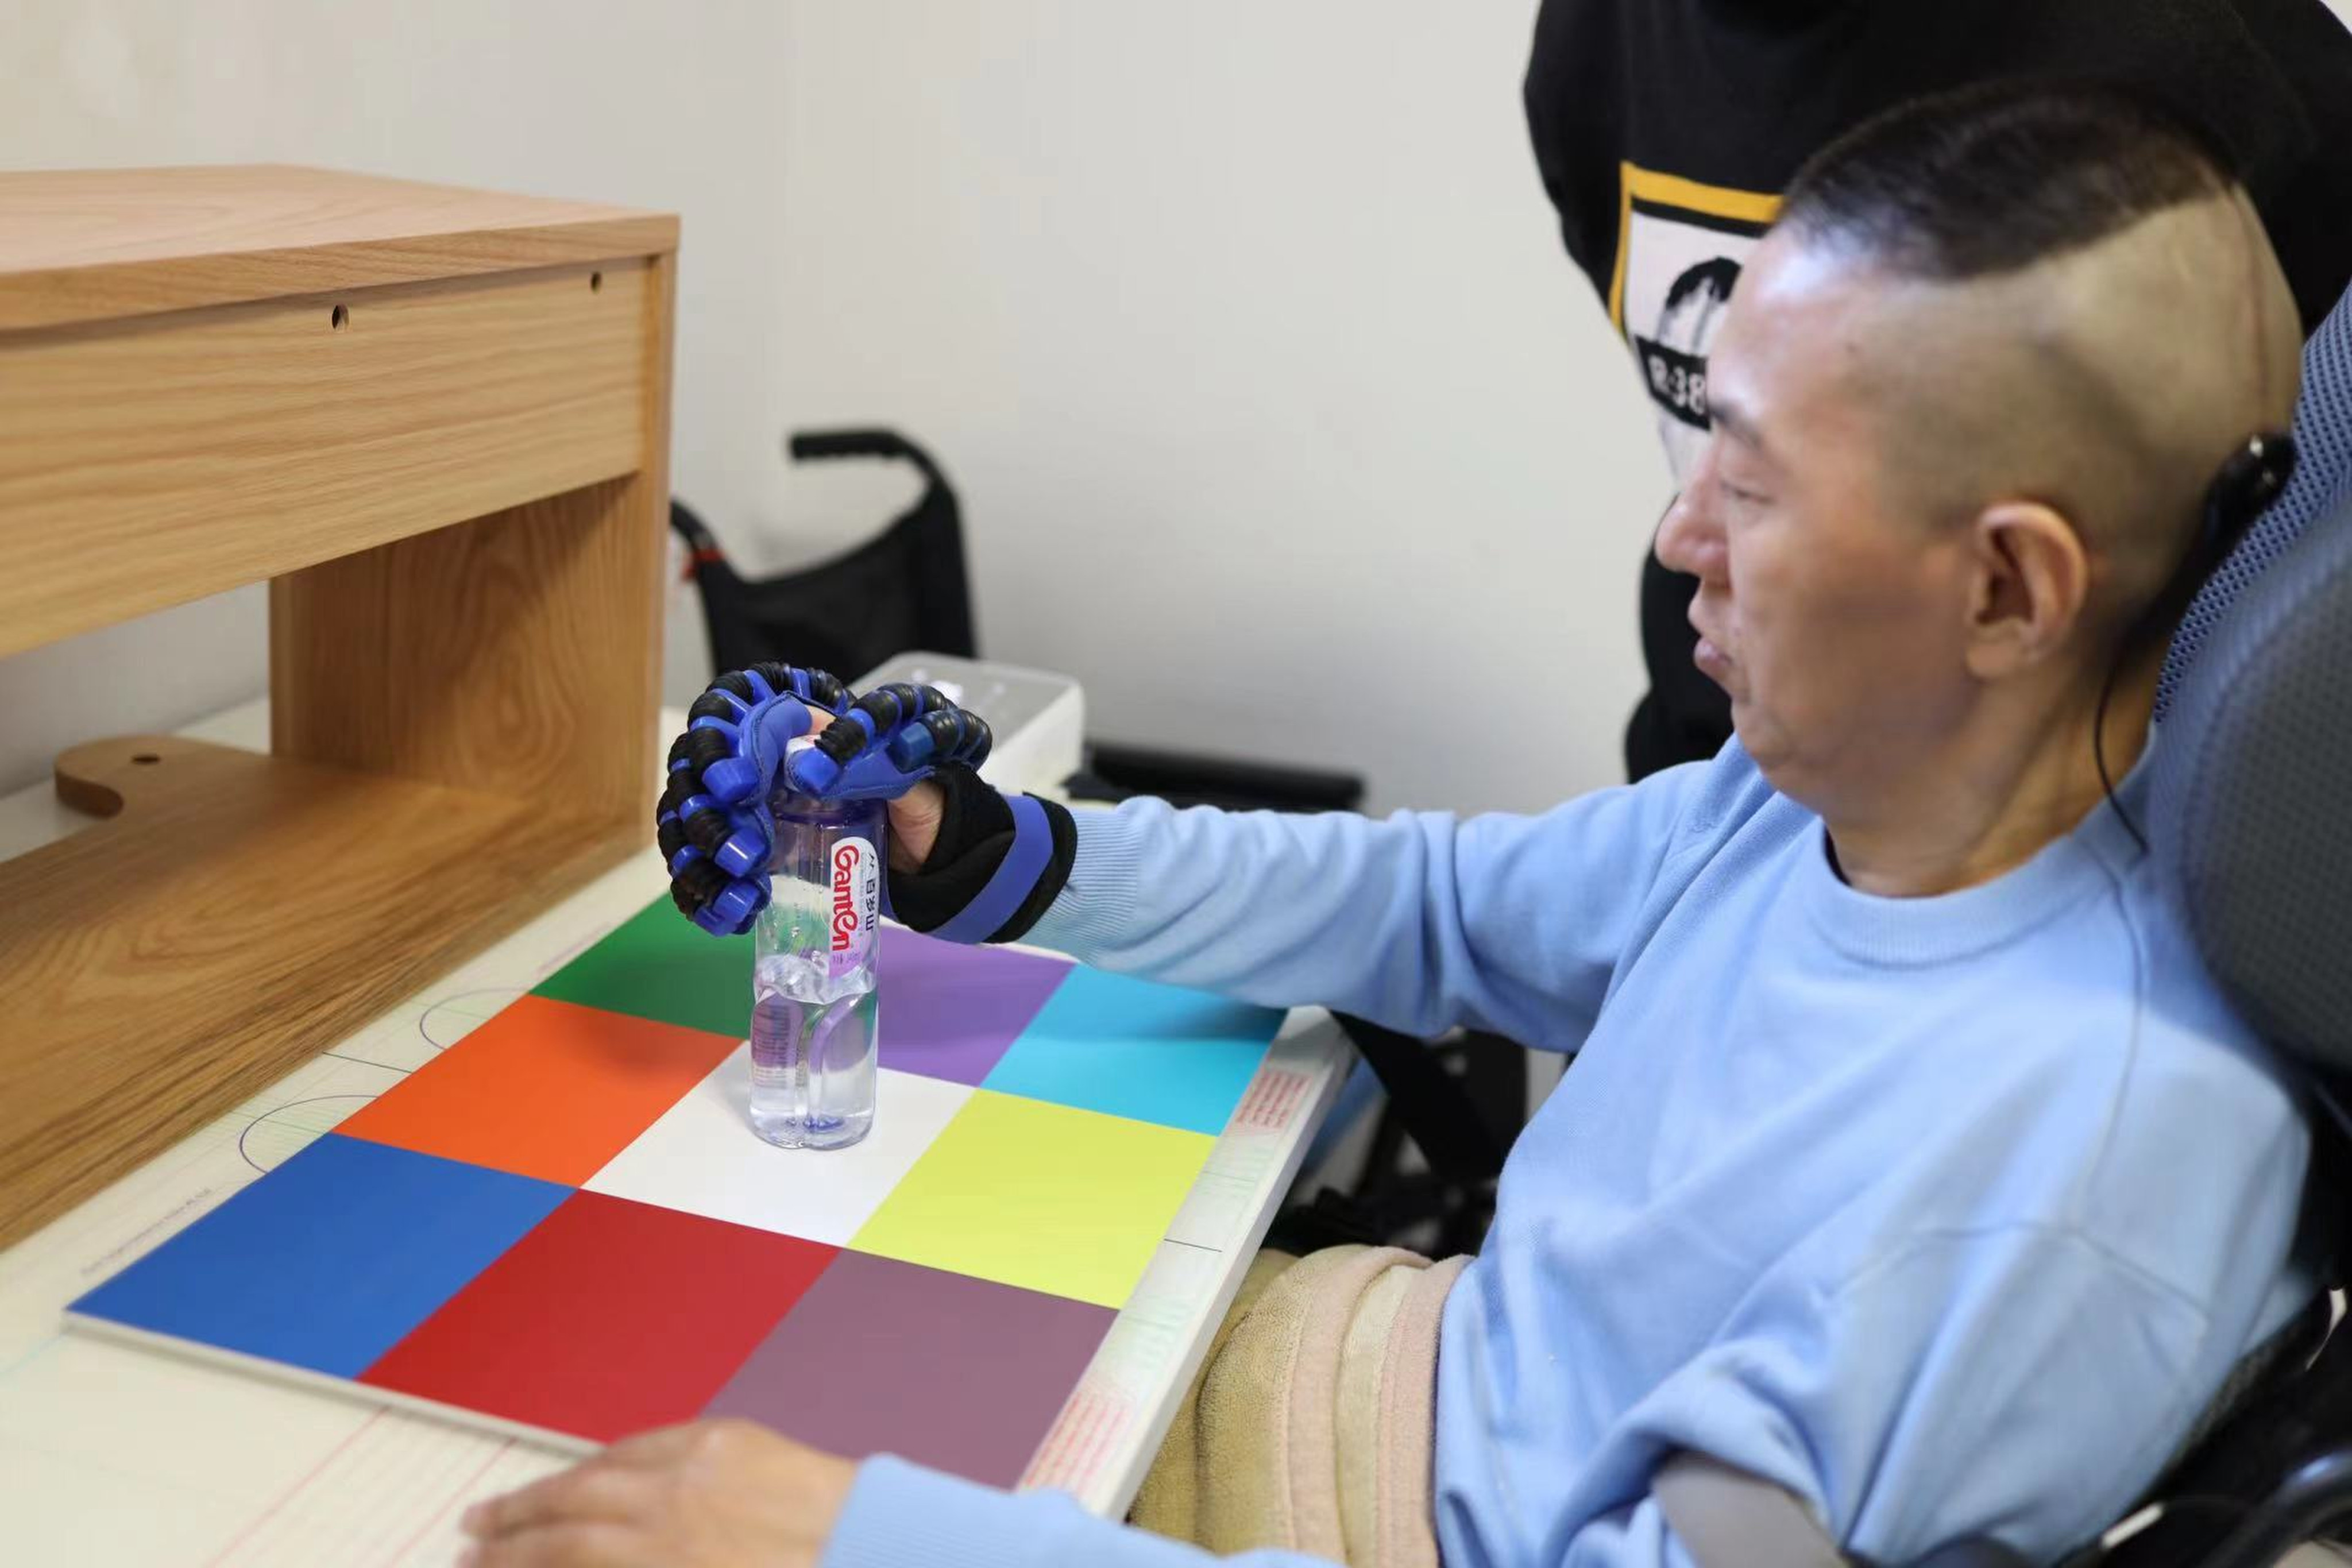 The first patient to receive the NEO brain-chip interface system is able to grasp objects with help from a prosthetic hand. Photo: Handout / Tsinghua University